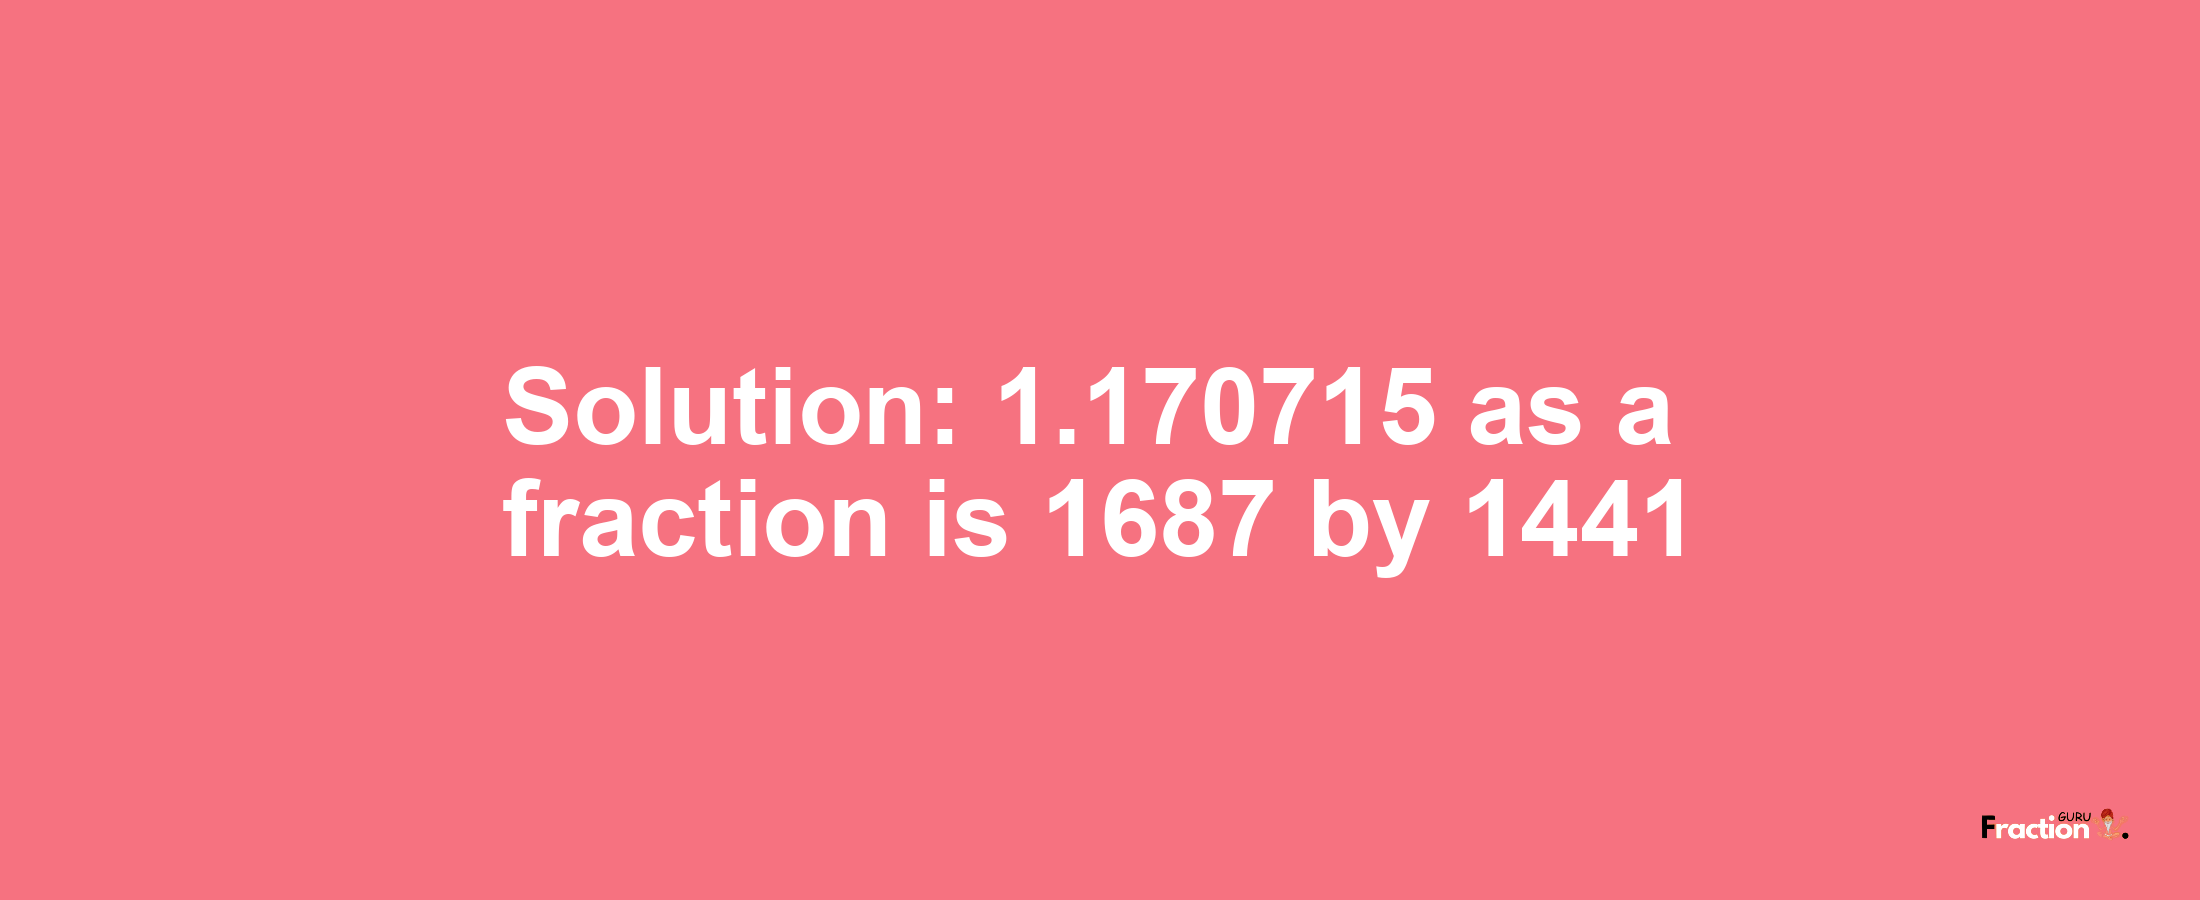 Solution:1.170715 as a fraction is 1687/1441